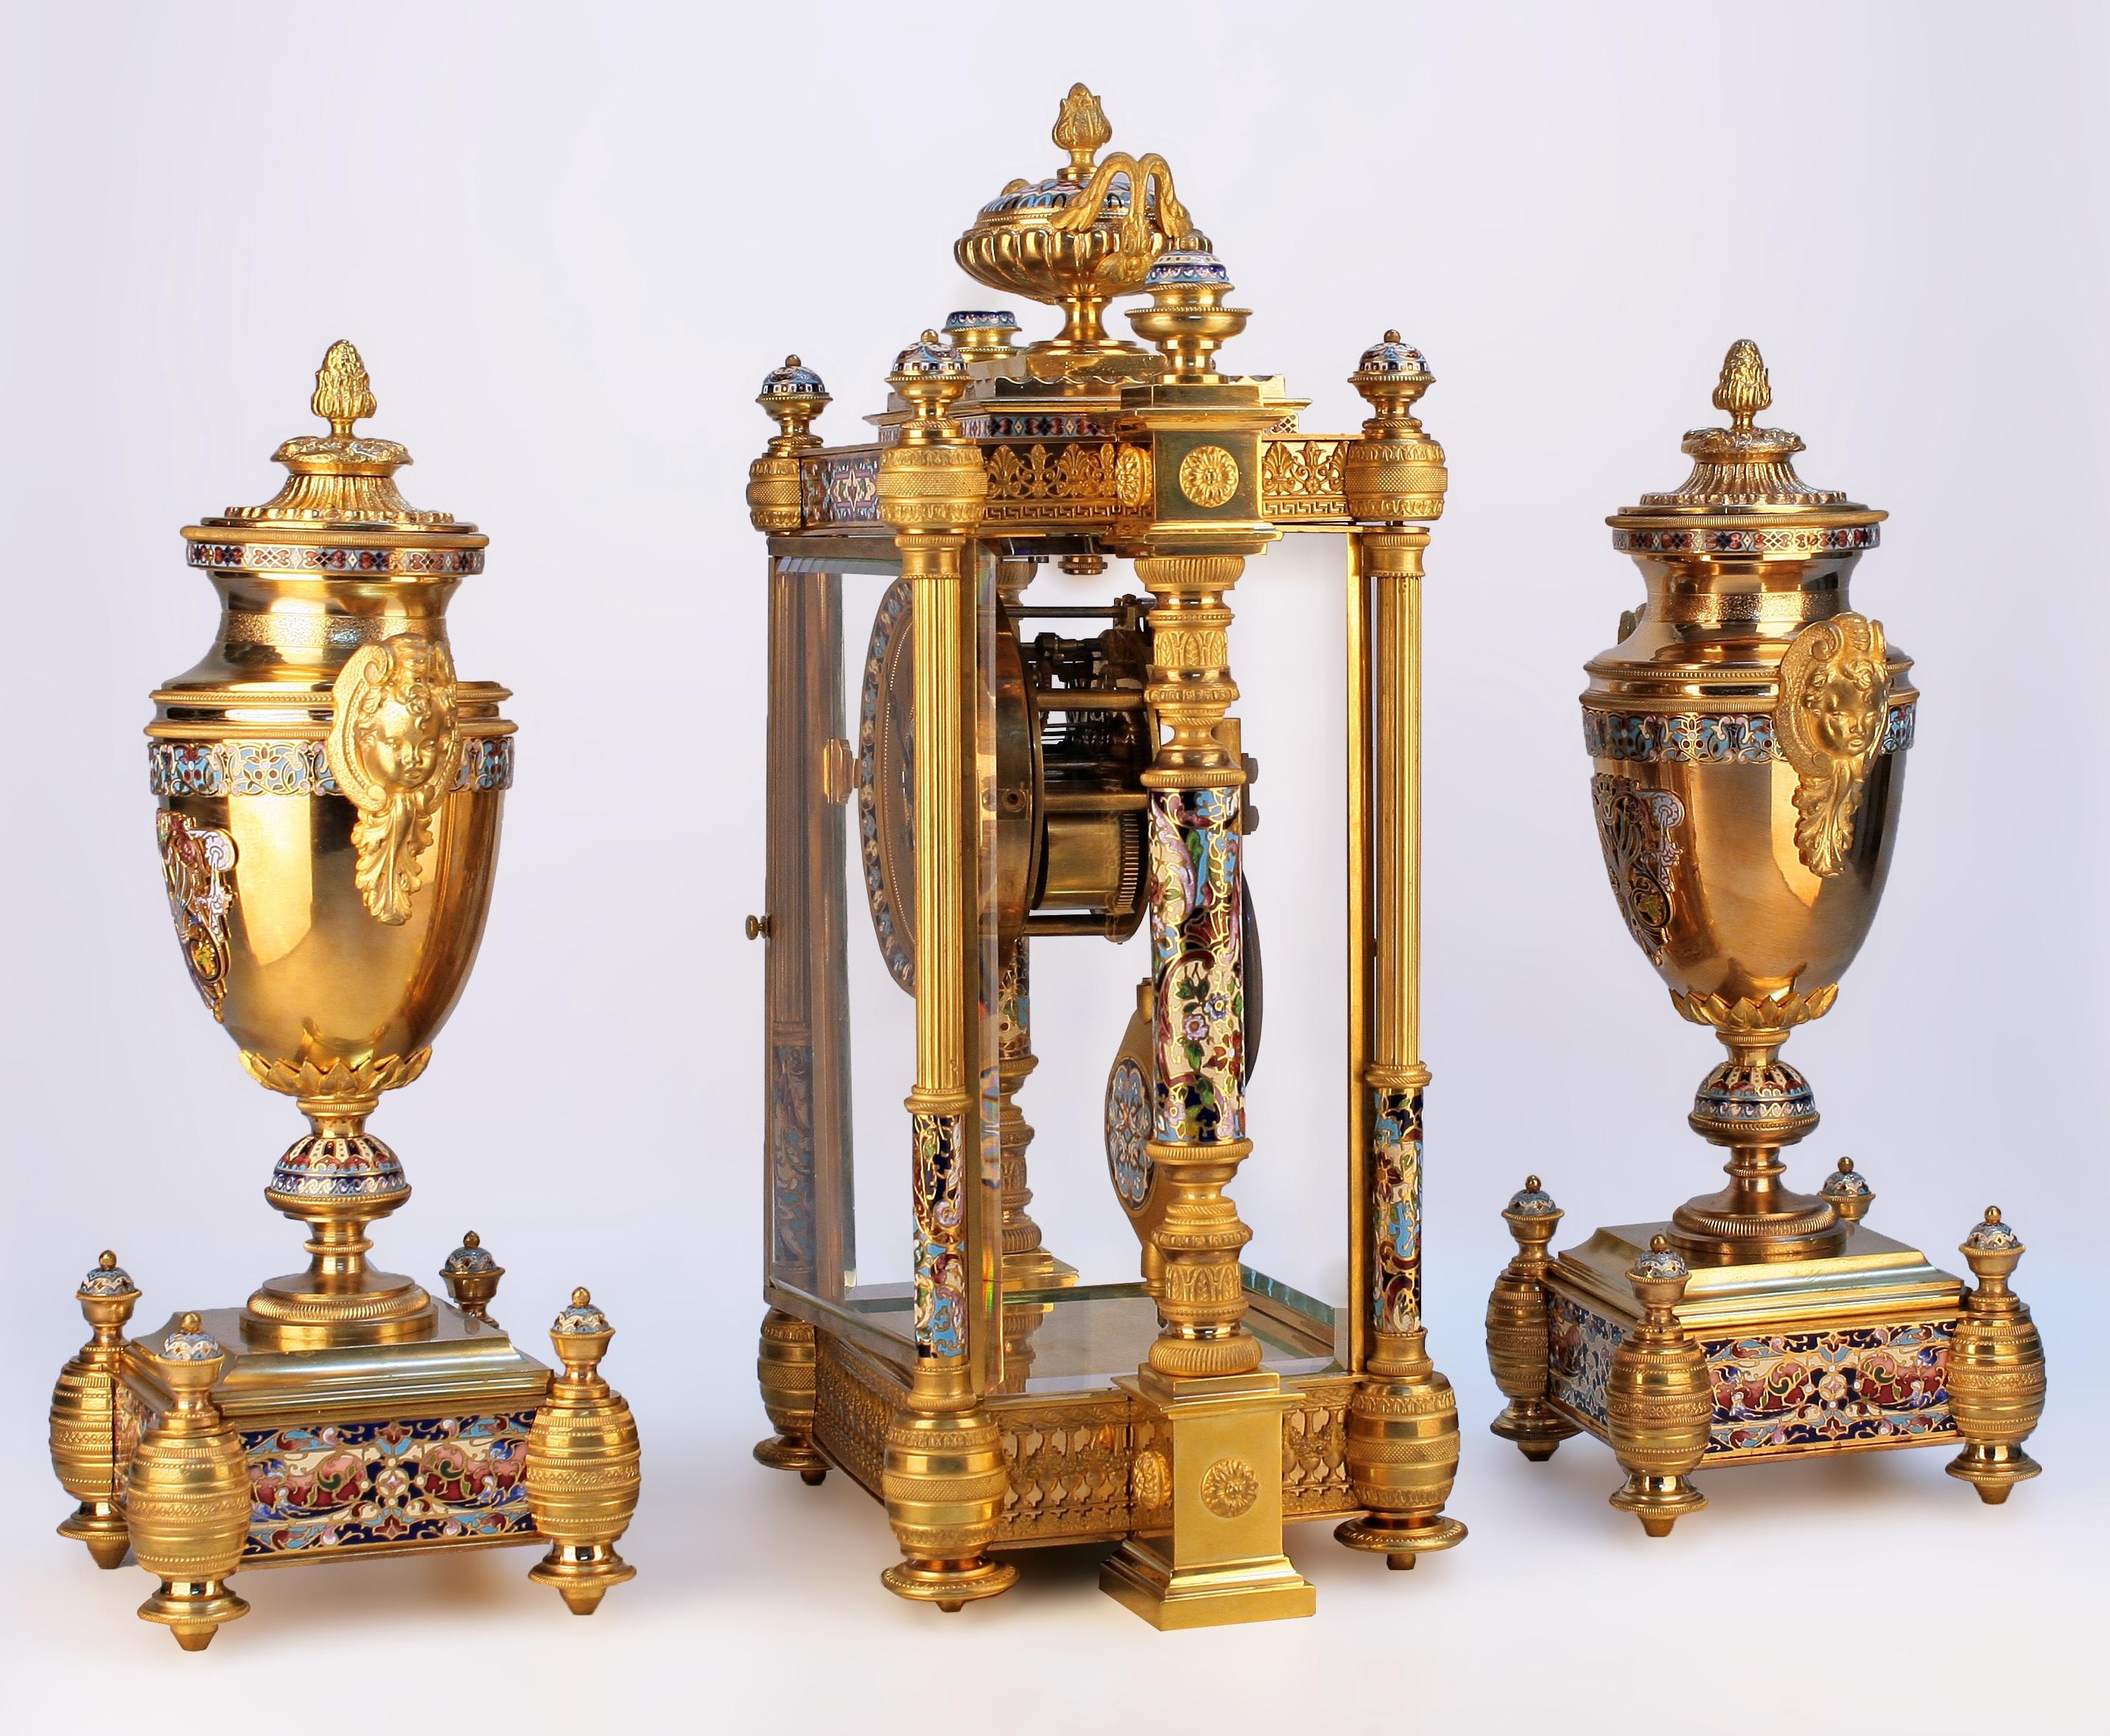 Napoleon III Late 19th C. French Ormolu Champlevé Enameled Clock Garniture Set by Japy Frères For Sale